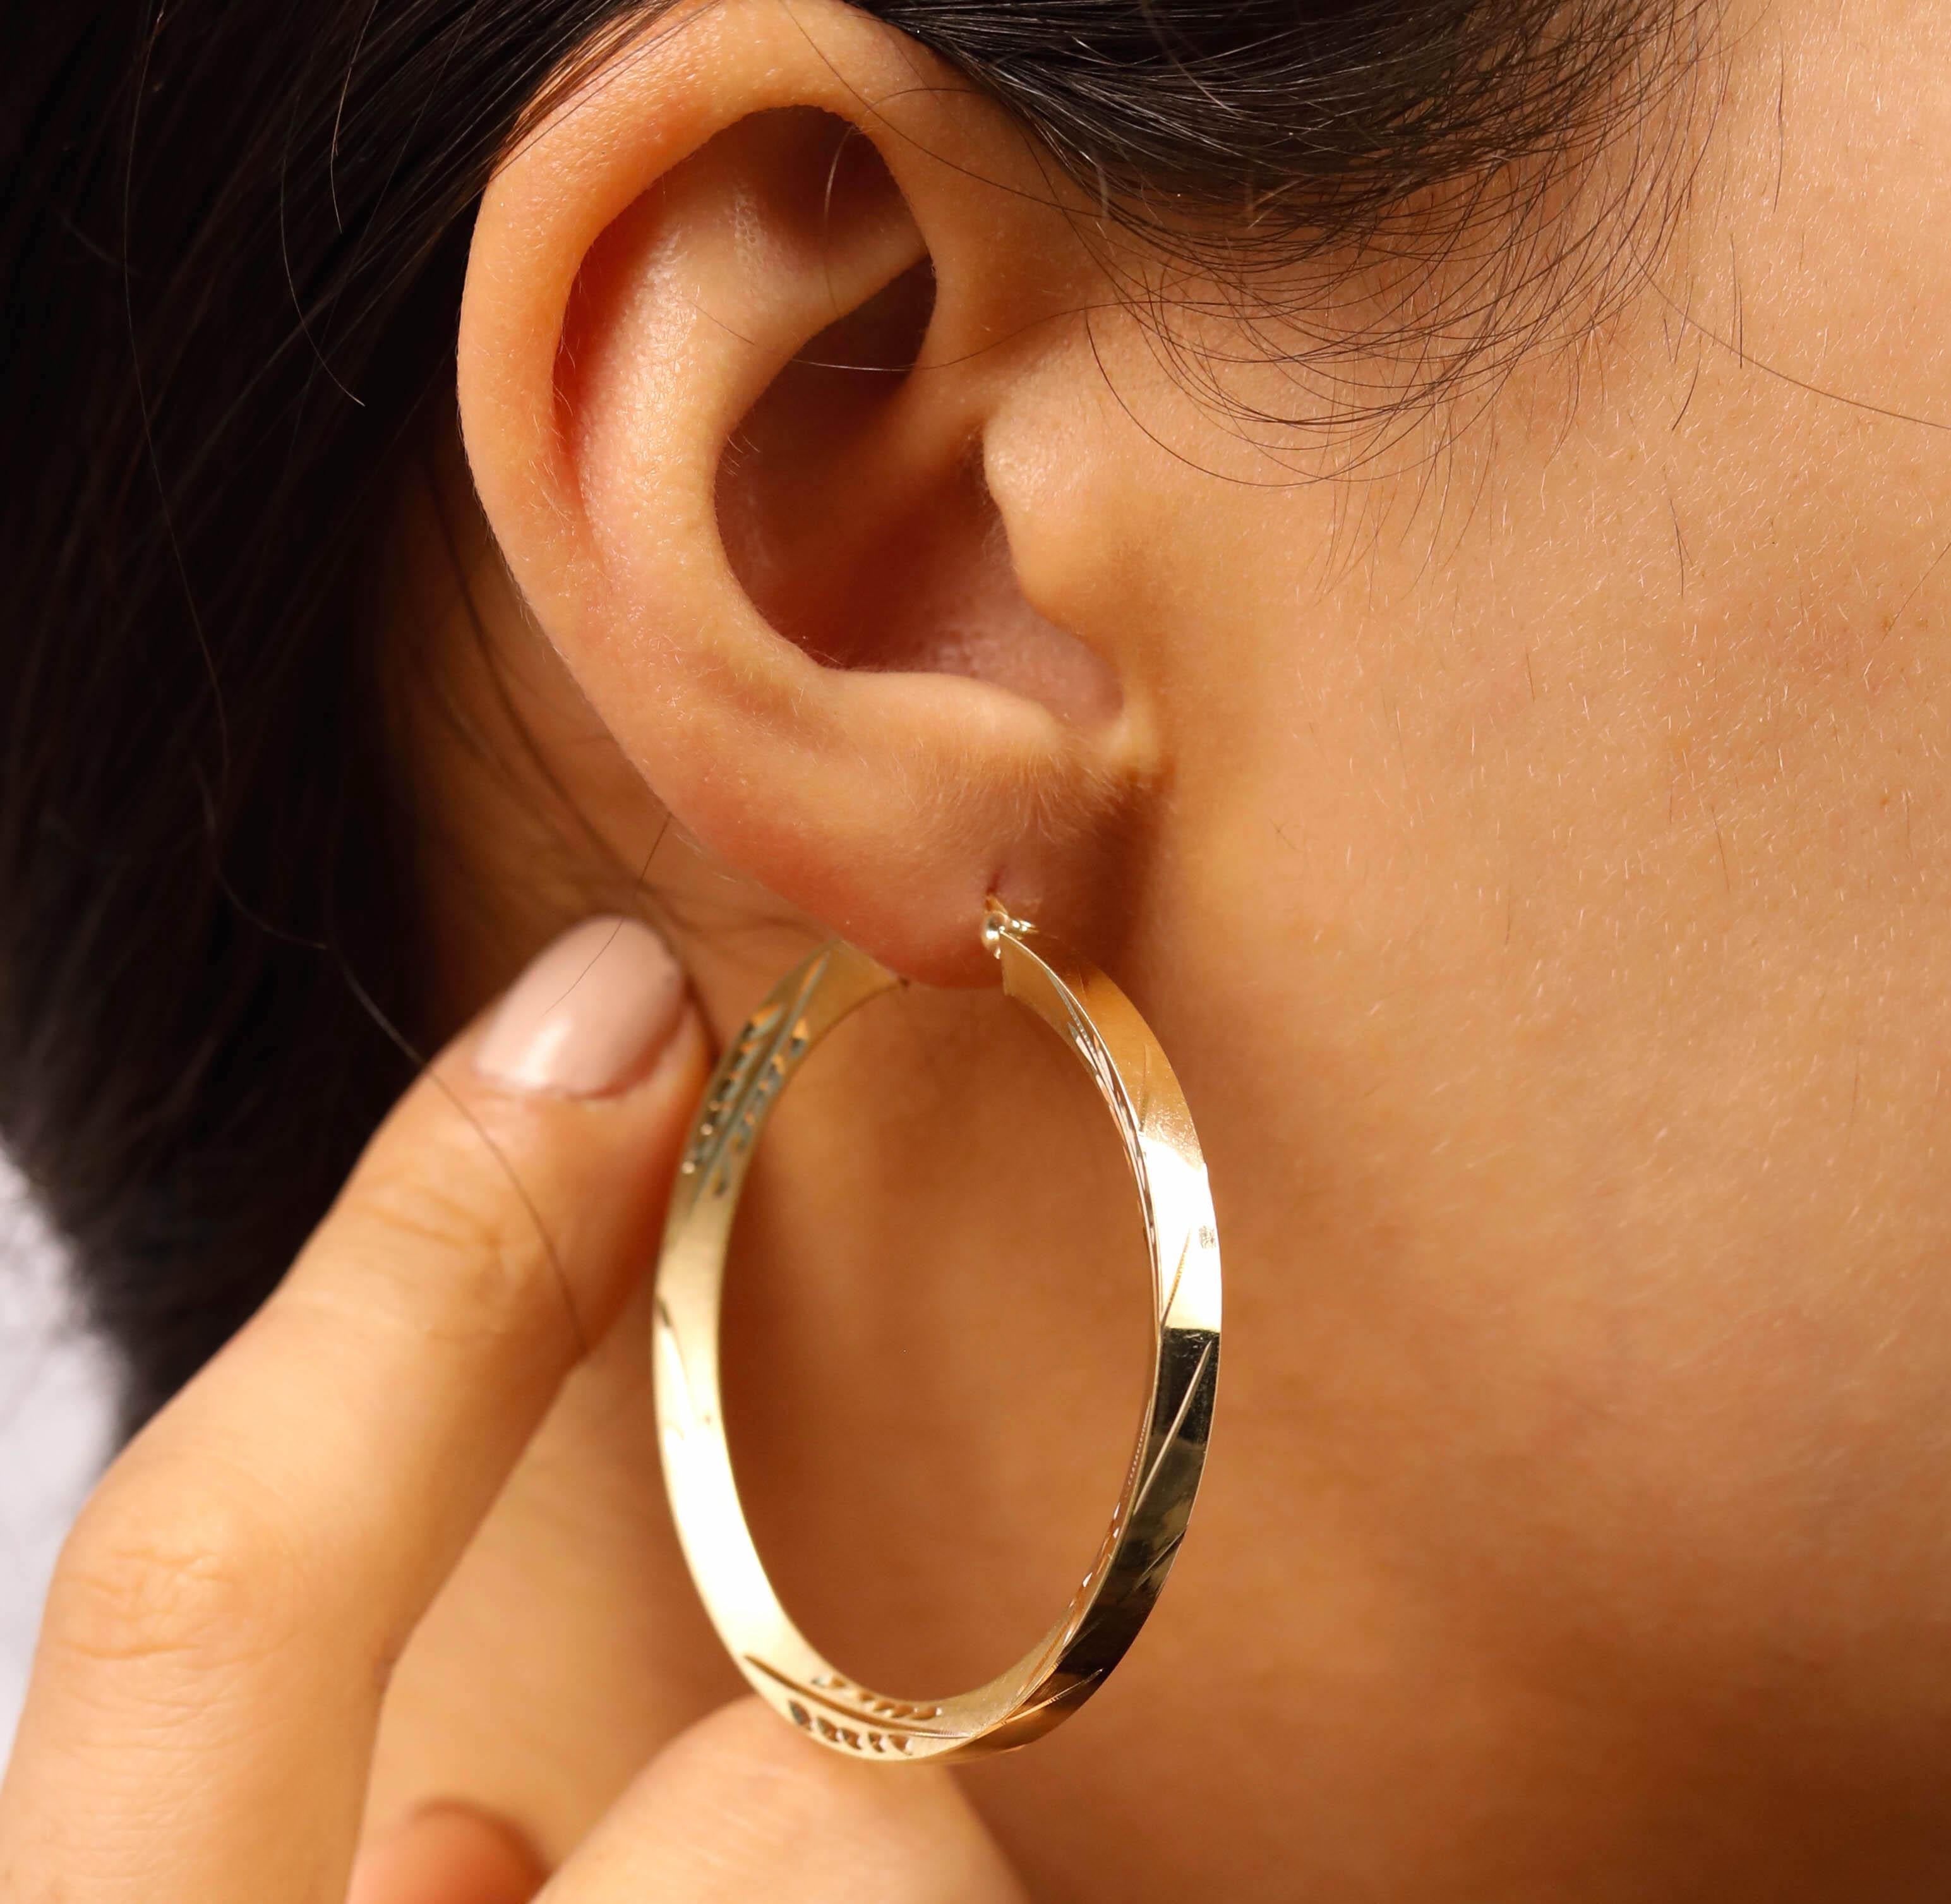 14 Kt Yellow Gold Hoop Earrings with Etched Design

These delicate hoop earrings are crafted in solid 14 karat yellow gold. Modeled after traditional jewelry, these hoop earrings are with Etched Design take on the classic gold hoop.

Metal Color: